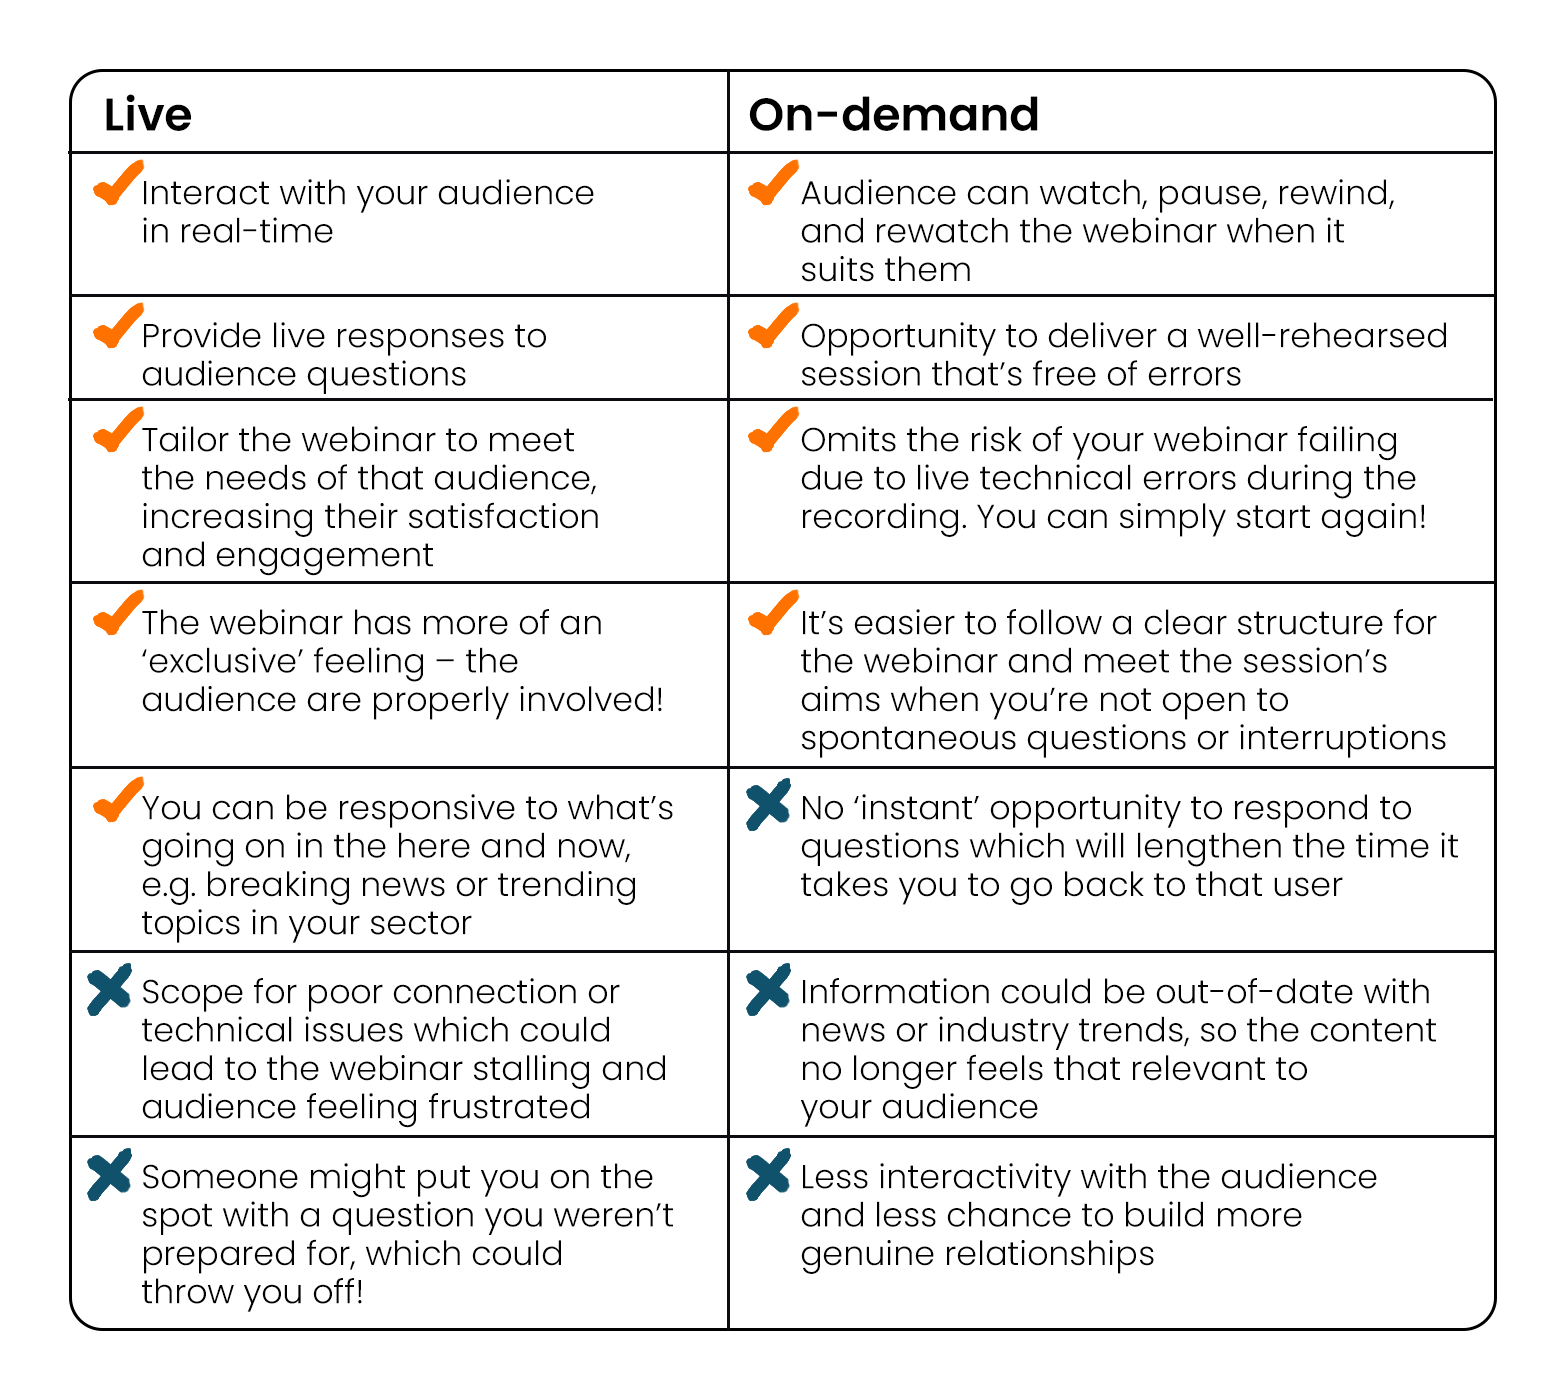 A table comparing the advantages and disadvantages of running live and on-demand B2B webinars.